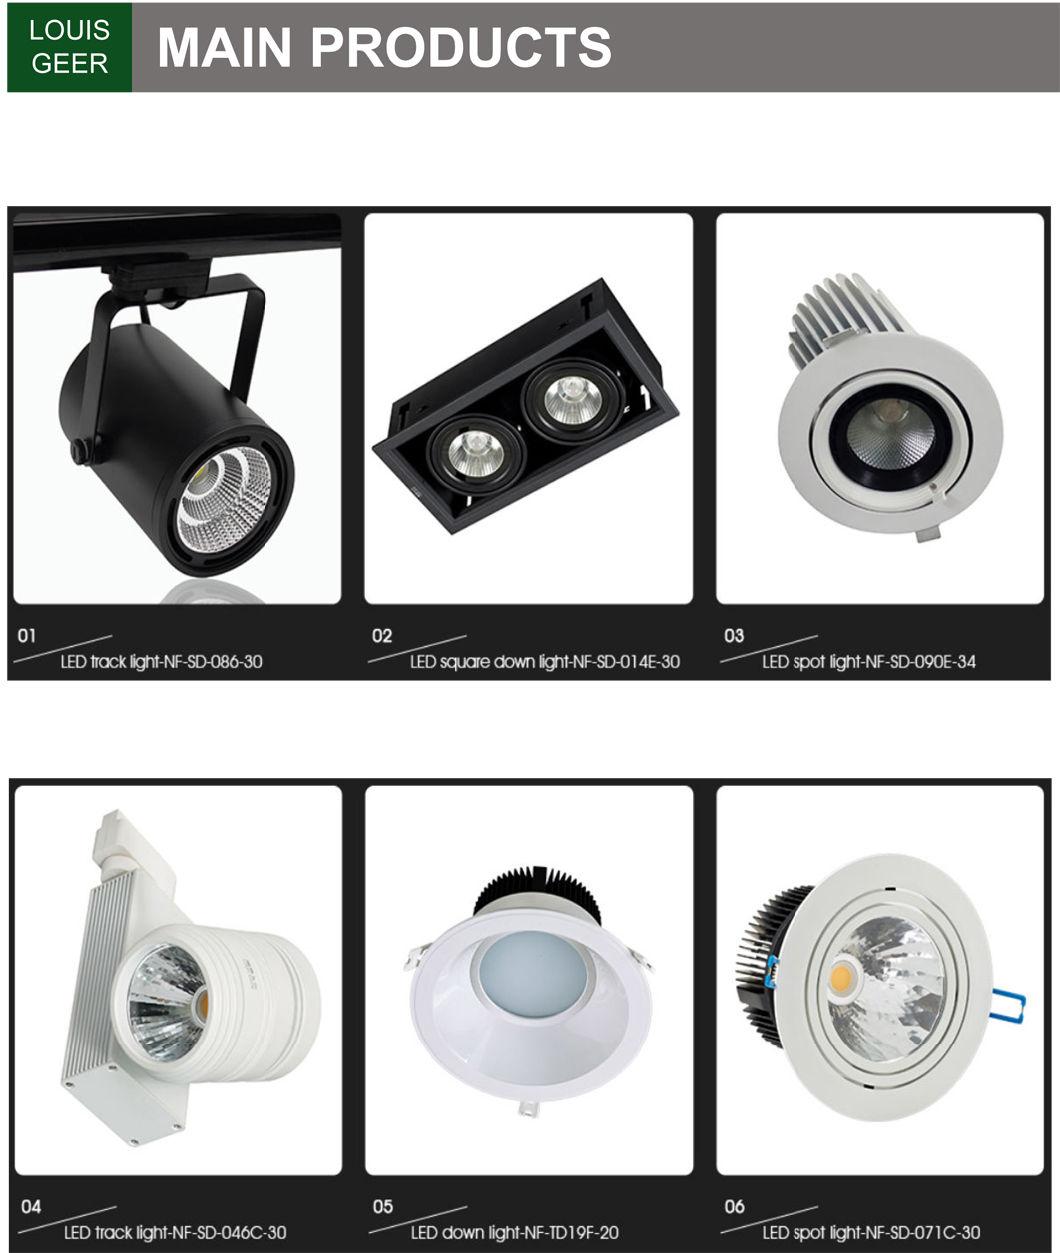 Factory Direct Supply Decorative Recessed Round Adjustable COB LED Dimmable Down Lights for Hotel Project